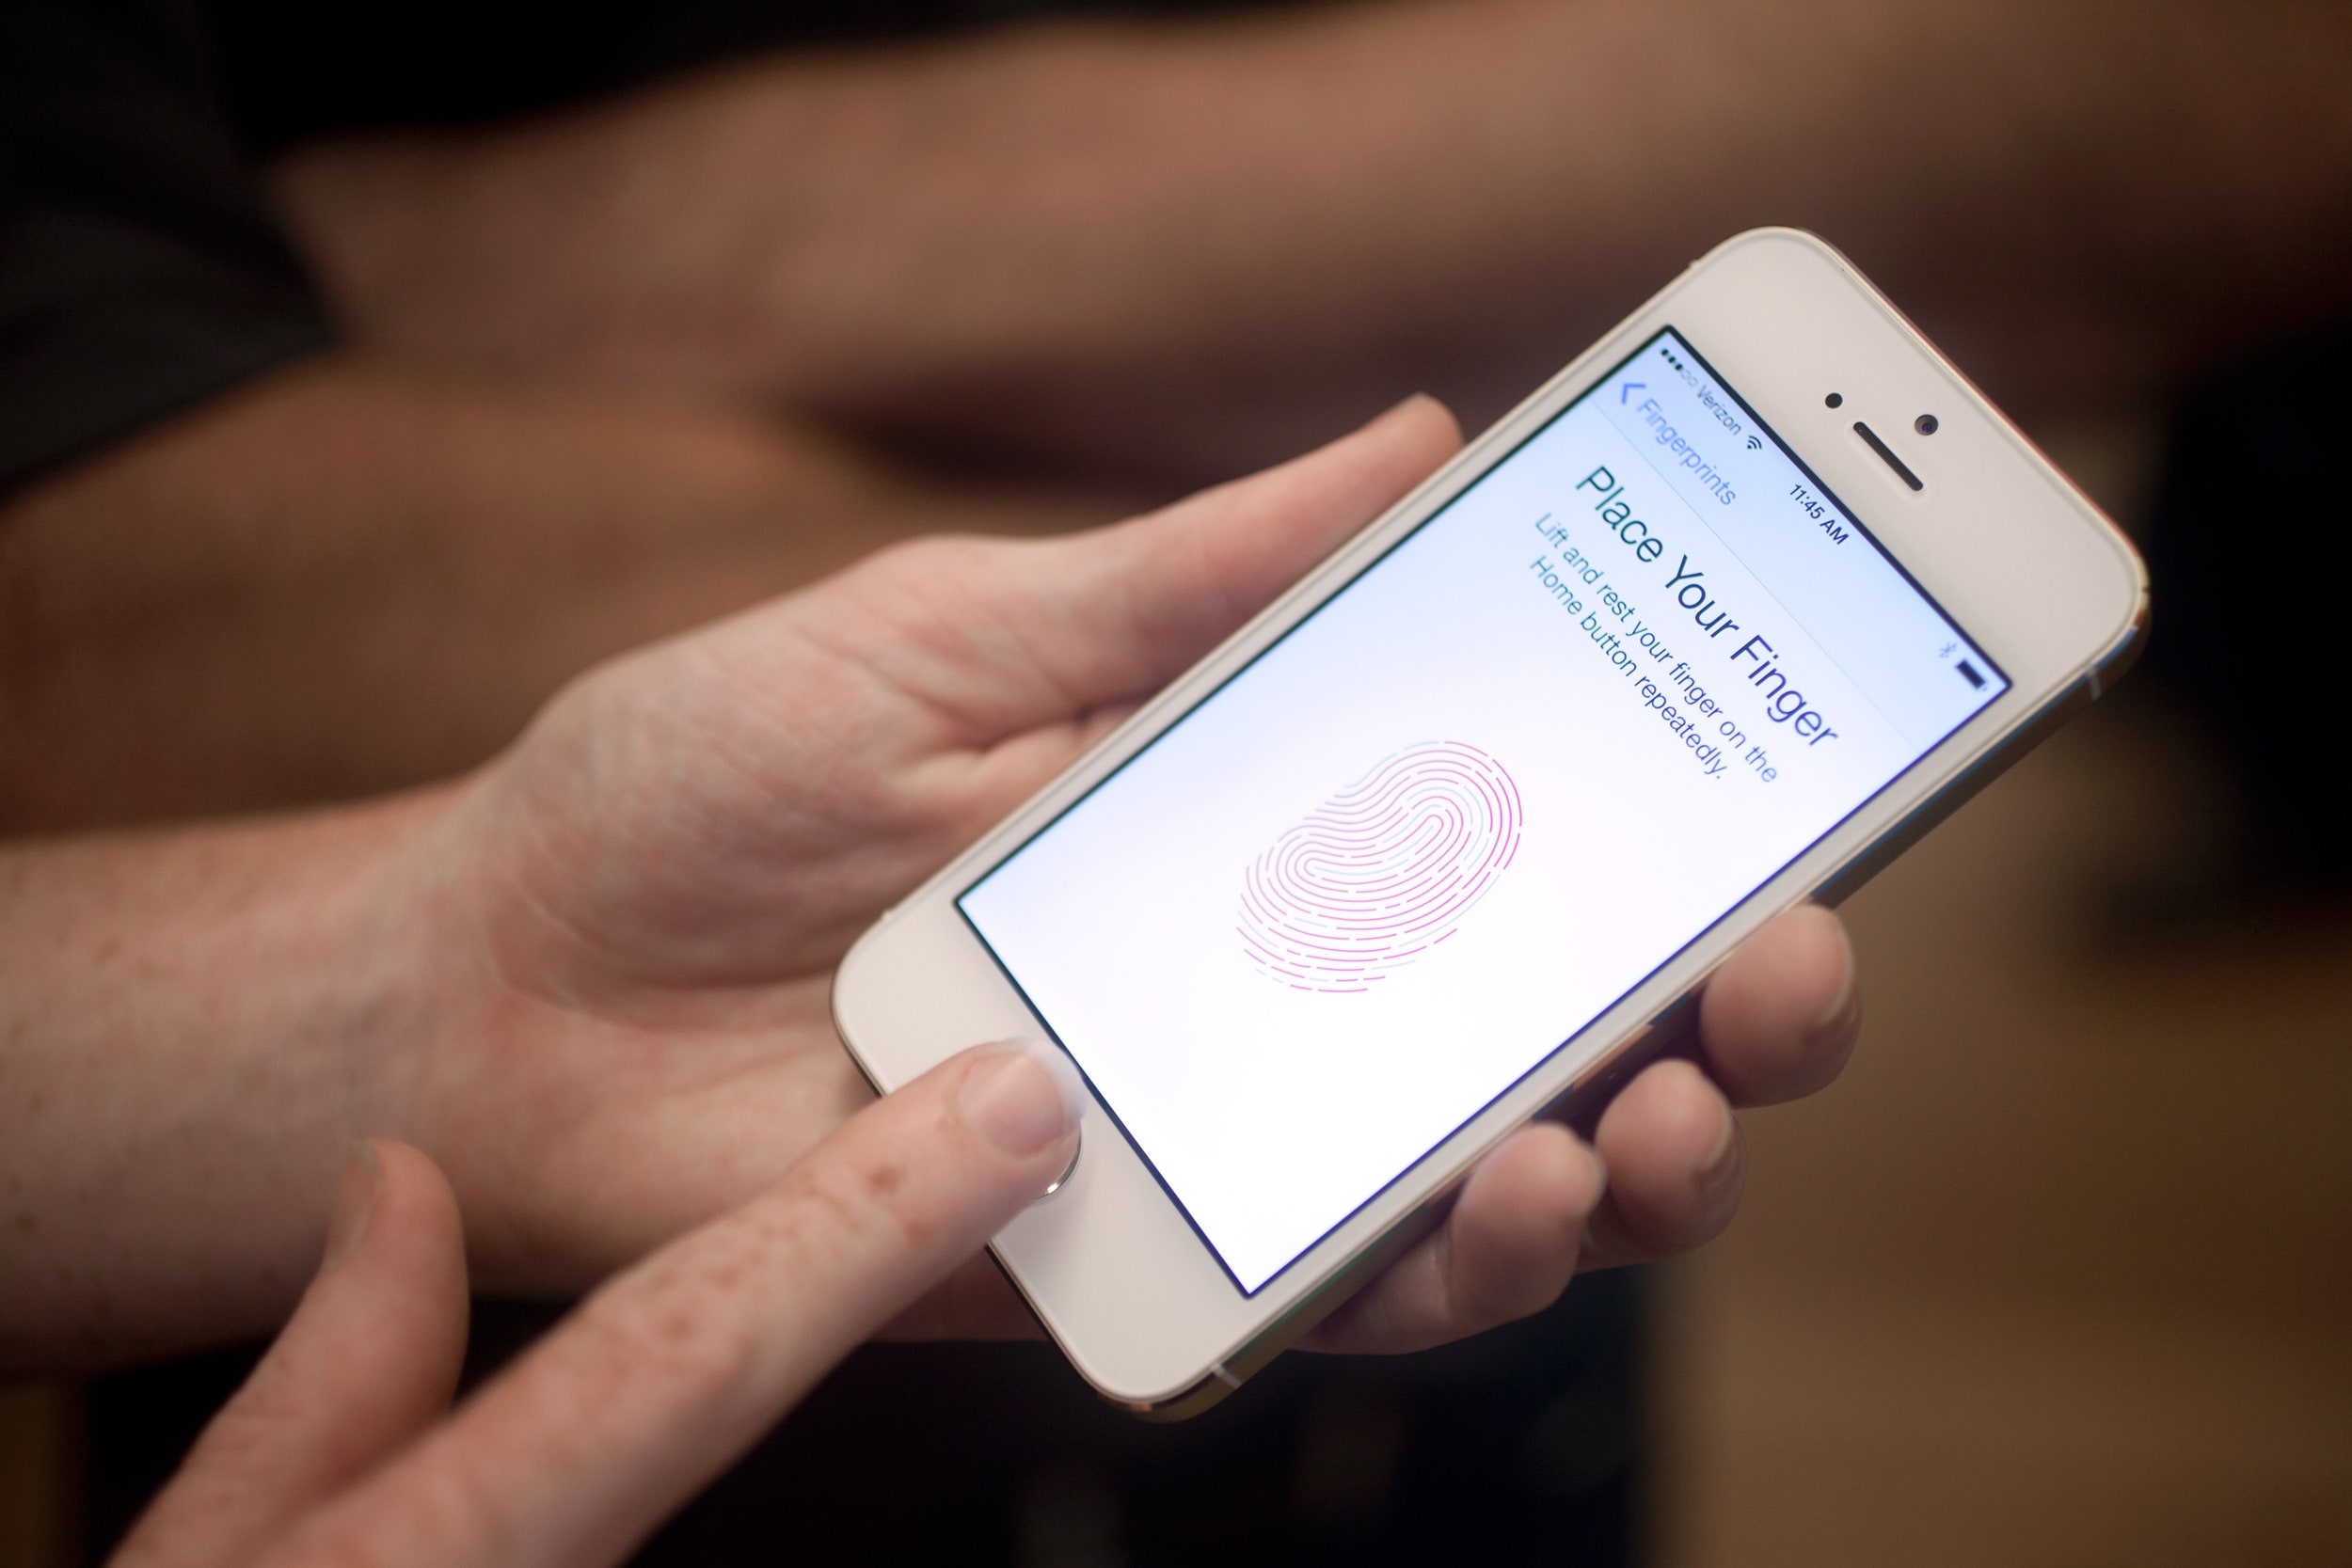 iphone-5s-to-include-touch-id-fingerprint-sensor